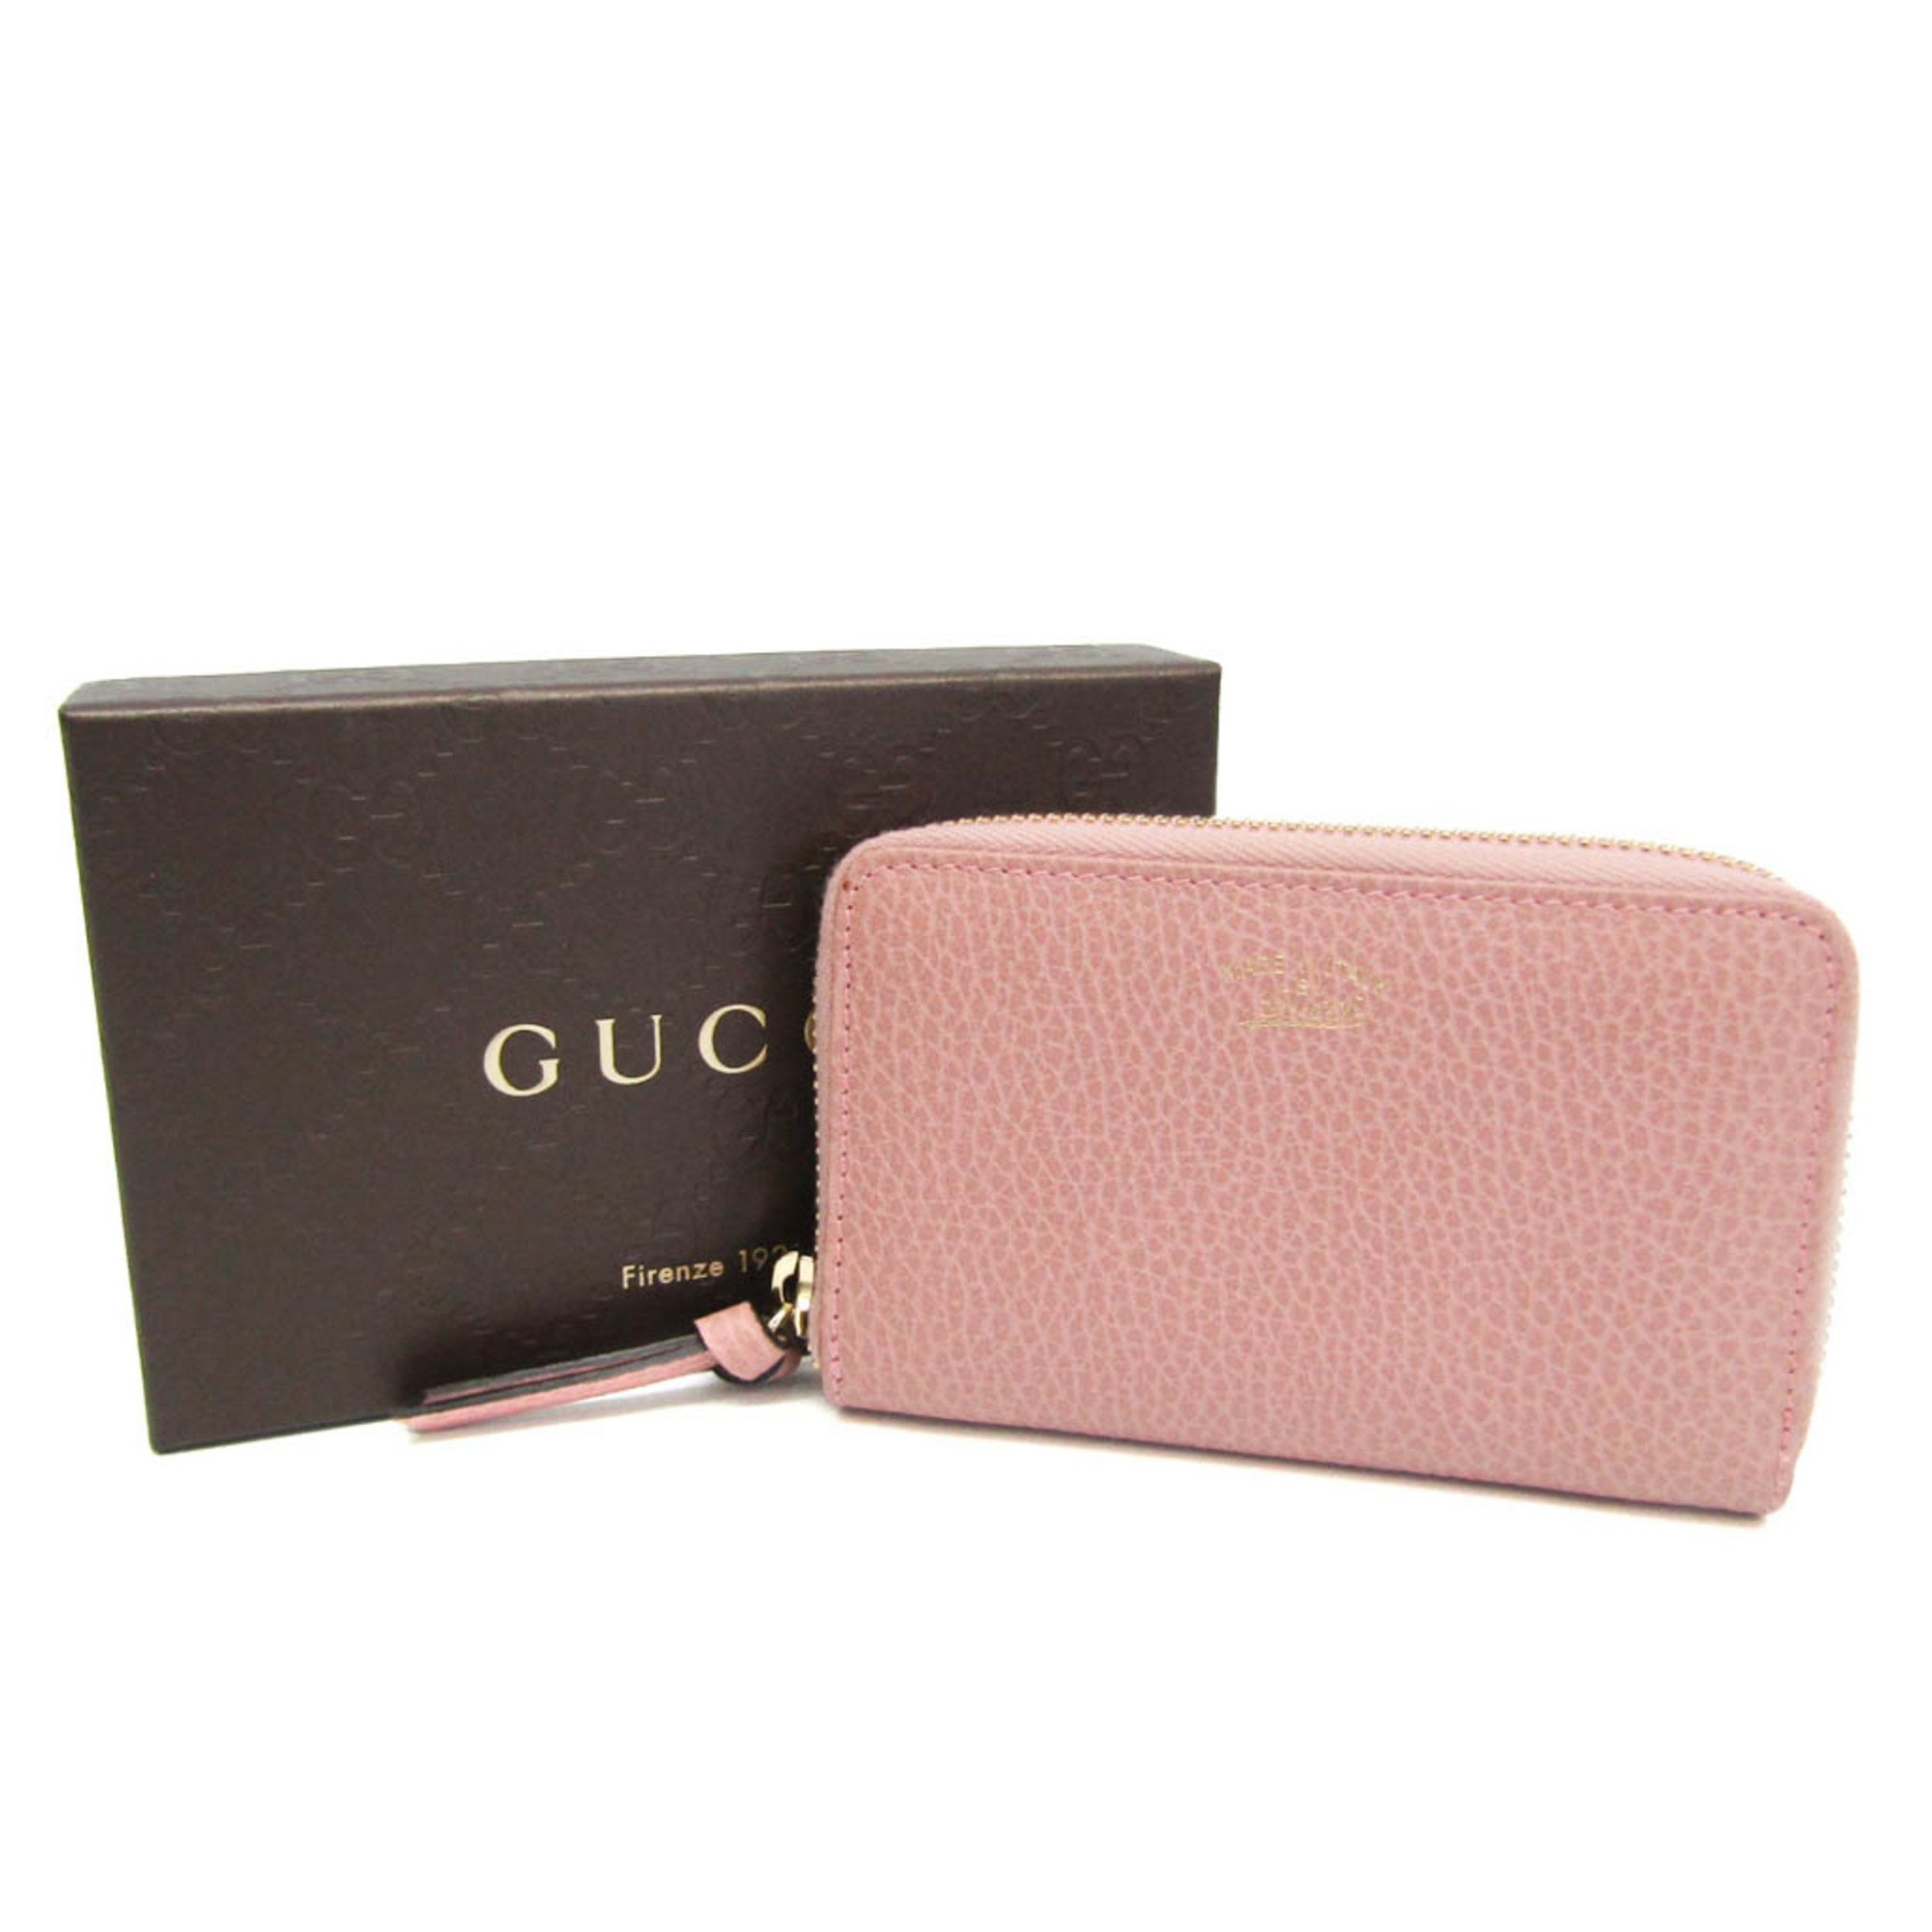 Gucci 368877 Women's Leather Card Wallet Pink